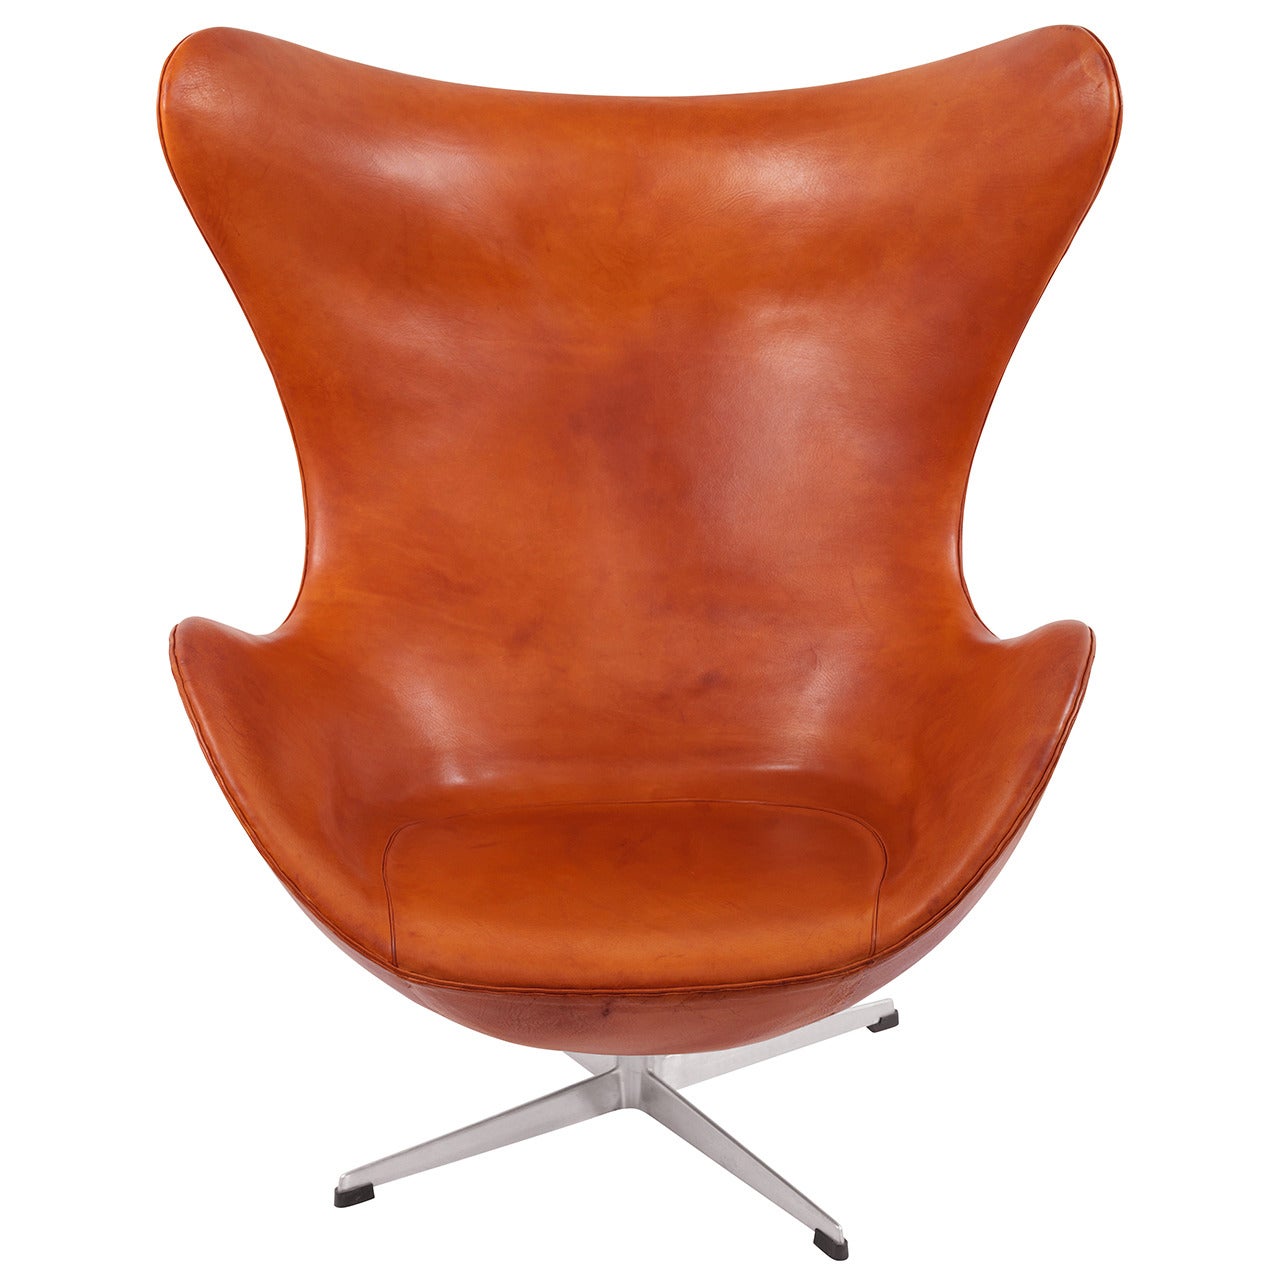 Stunning and Early Egg Chair by Arne Jacobsen, 1958 For Sale